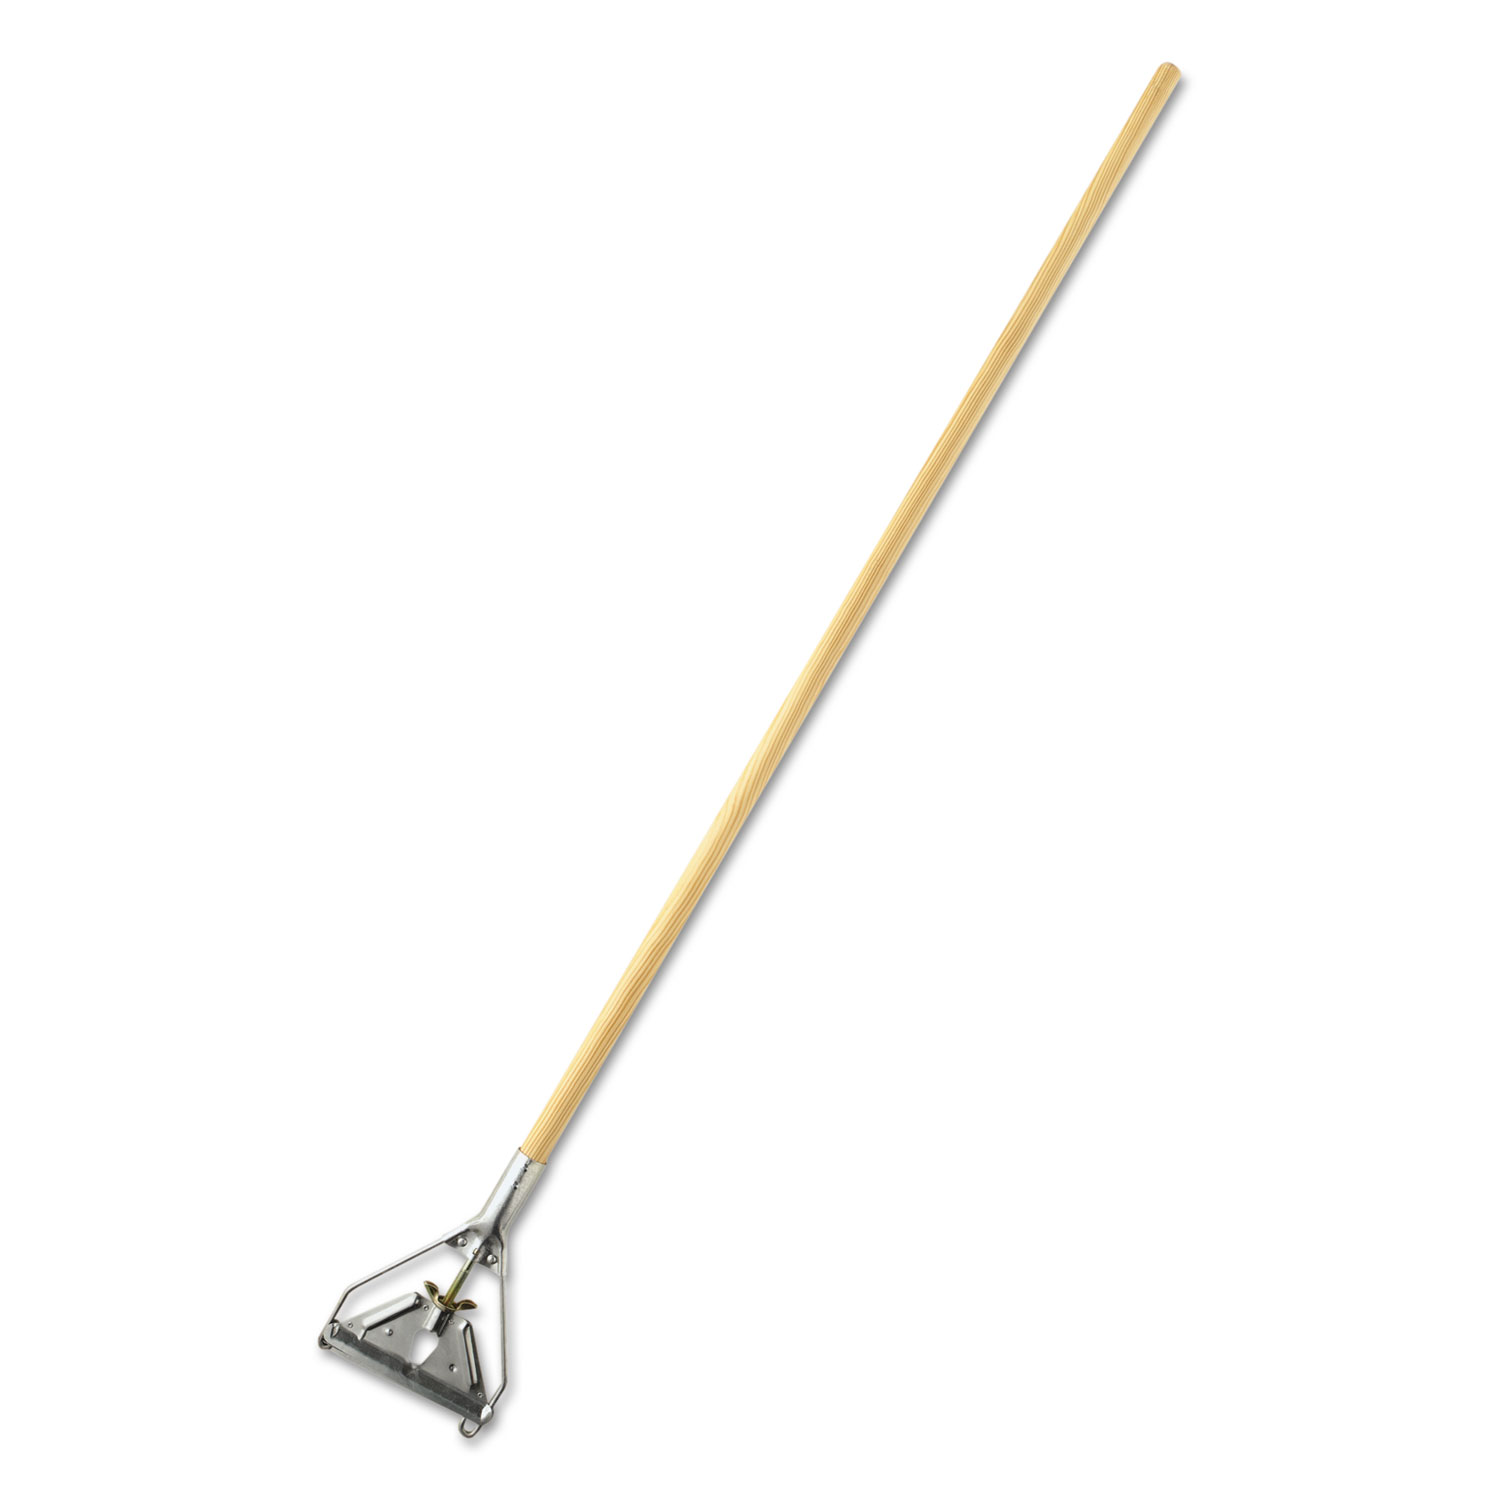  Rubbermaid Commercial FGH516000000 Invader Side-Gate Wet-Mop Handle, 60, 1-1/8Dia, Wood/Steel (RCPH516) 